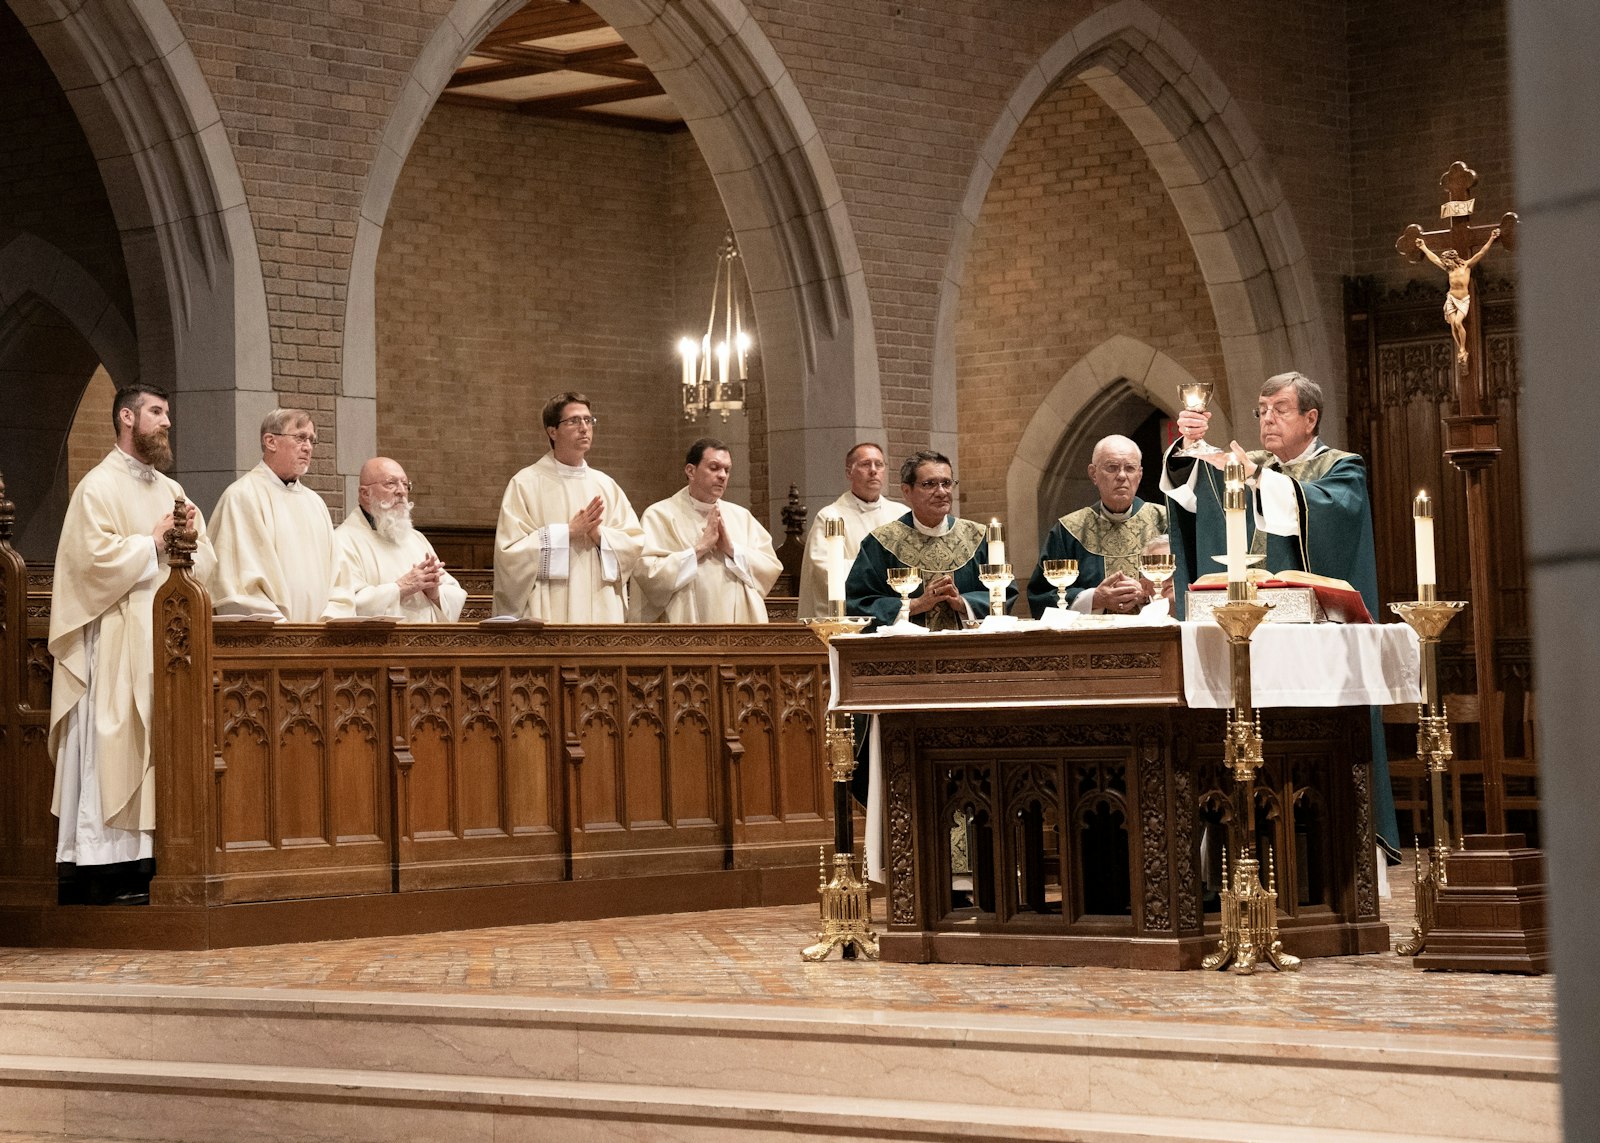 Detroit Archbishop Allen H. Vigneron, right, offers Mass for this year's jubilarians in the chapel at Sacred Heart Major Seminary in Detroit on Tuesday, June 18.